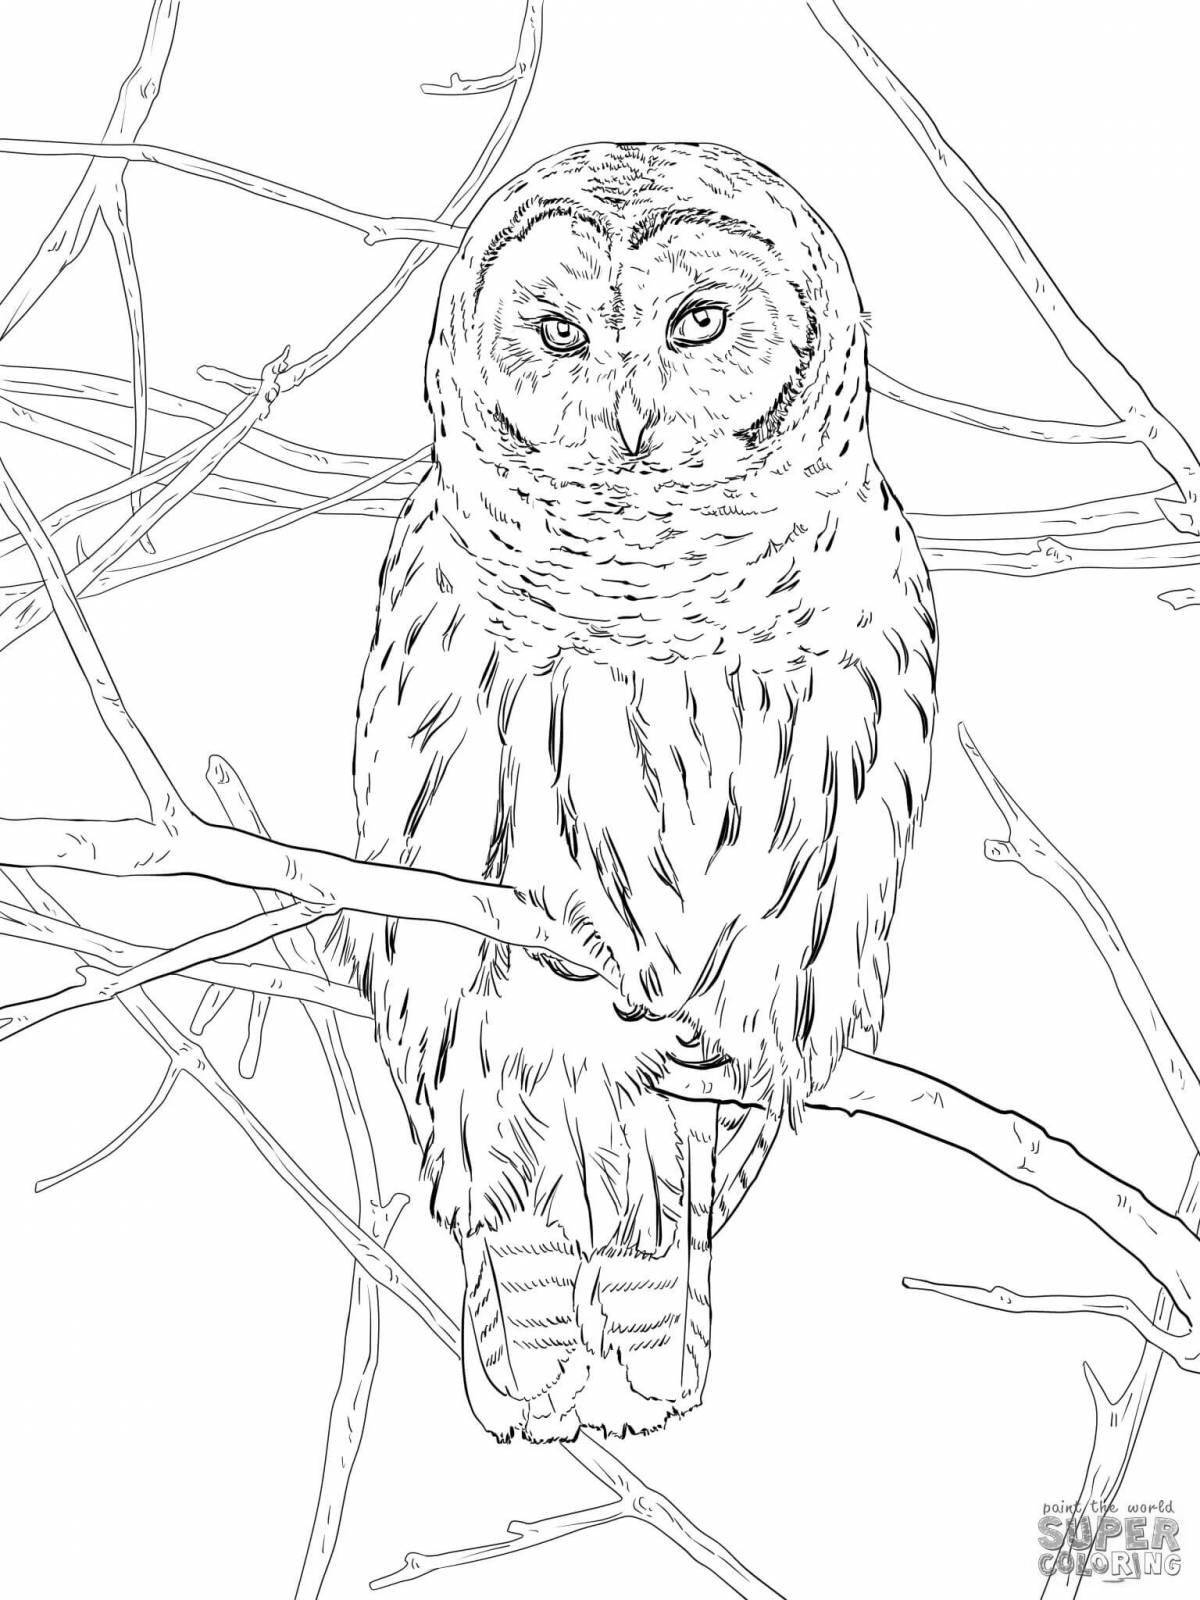 Large eared owl coloring book